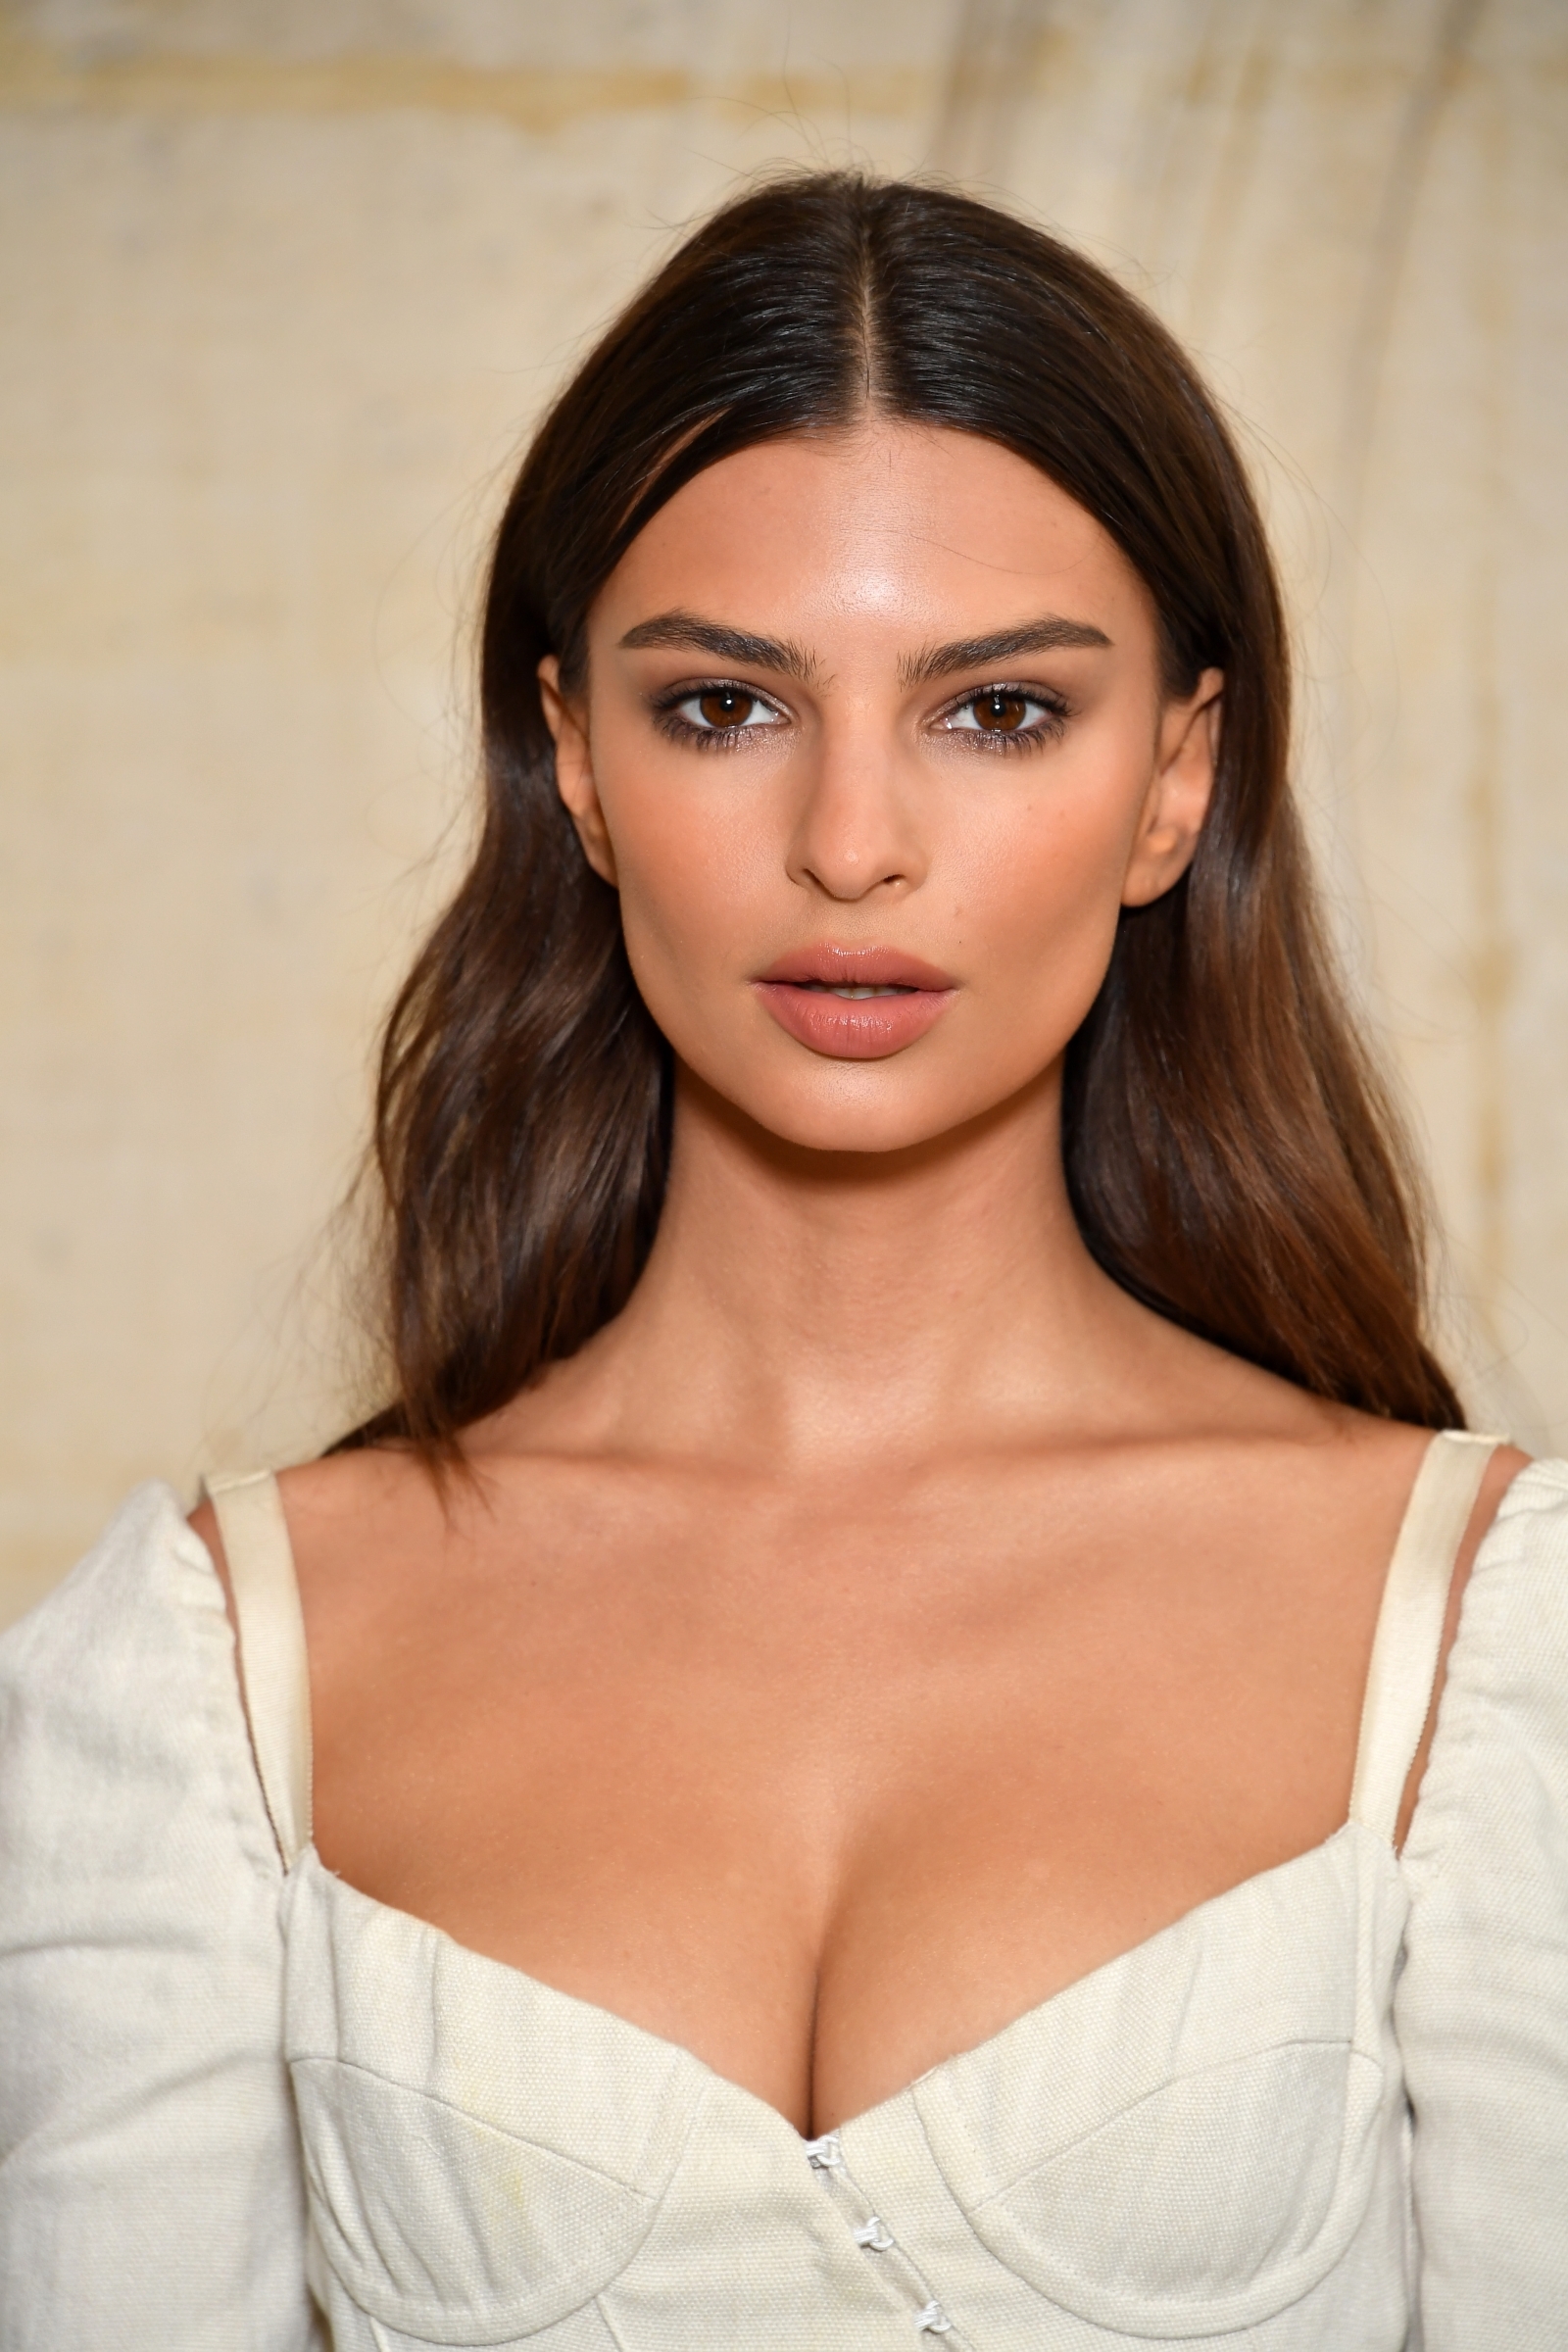 Emily Ratajkowski Leaves Little To The Imagination With